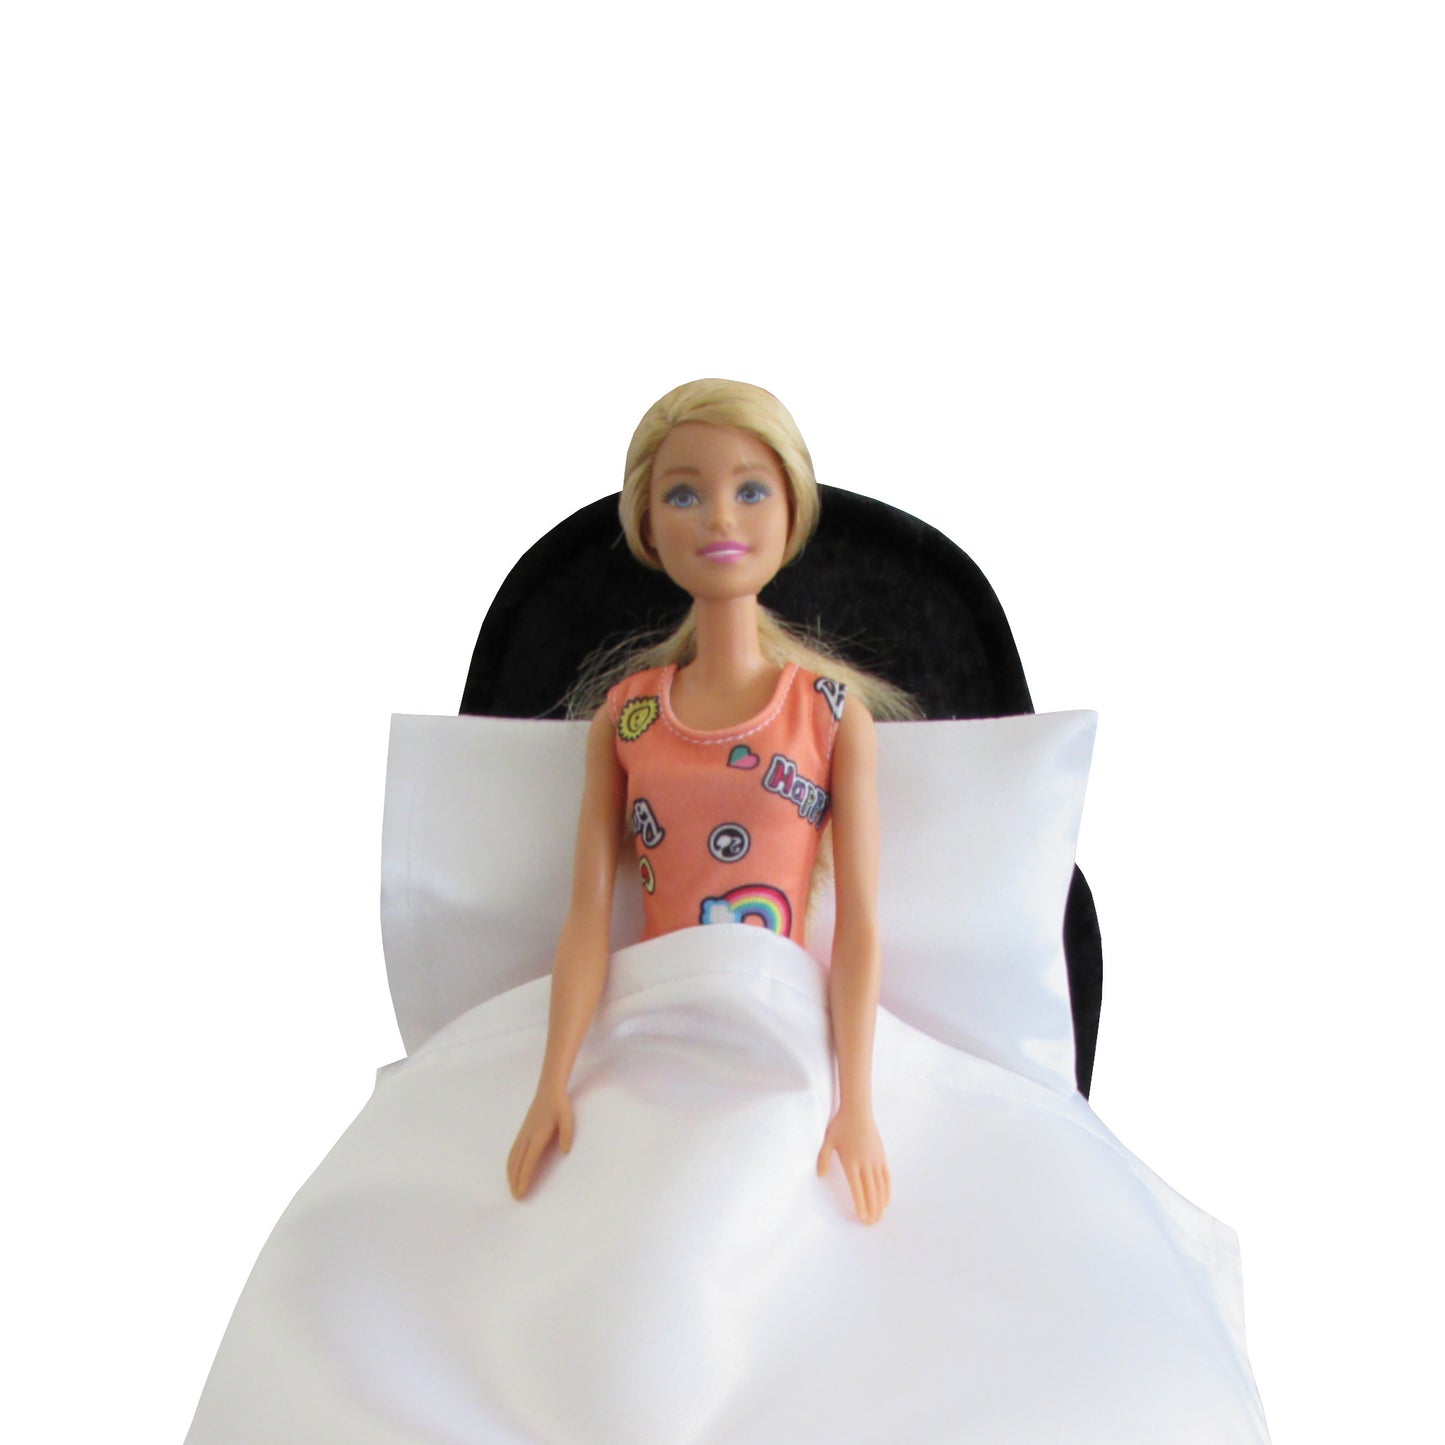 White Satin Doll Fitted Sheet, Pillow, and Black Crushed Velvet Doll Bed for 11.5-inch and 12-inch dolls with Barbie doll